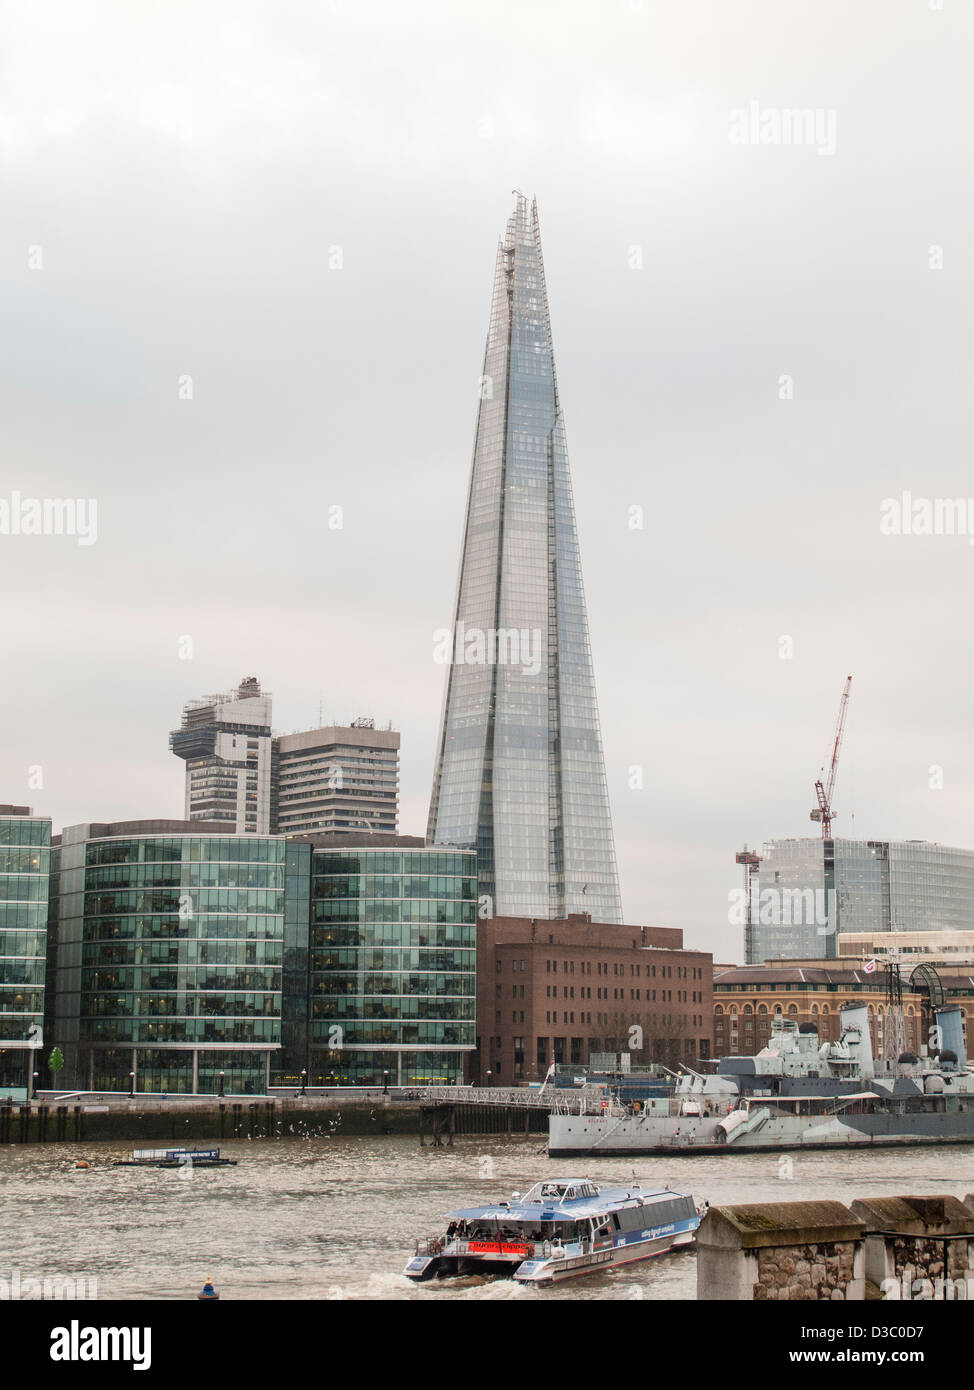 The Shard and London Bridge City viewed from the Tower of London across the River Thames on a cloudy day Stock Photo